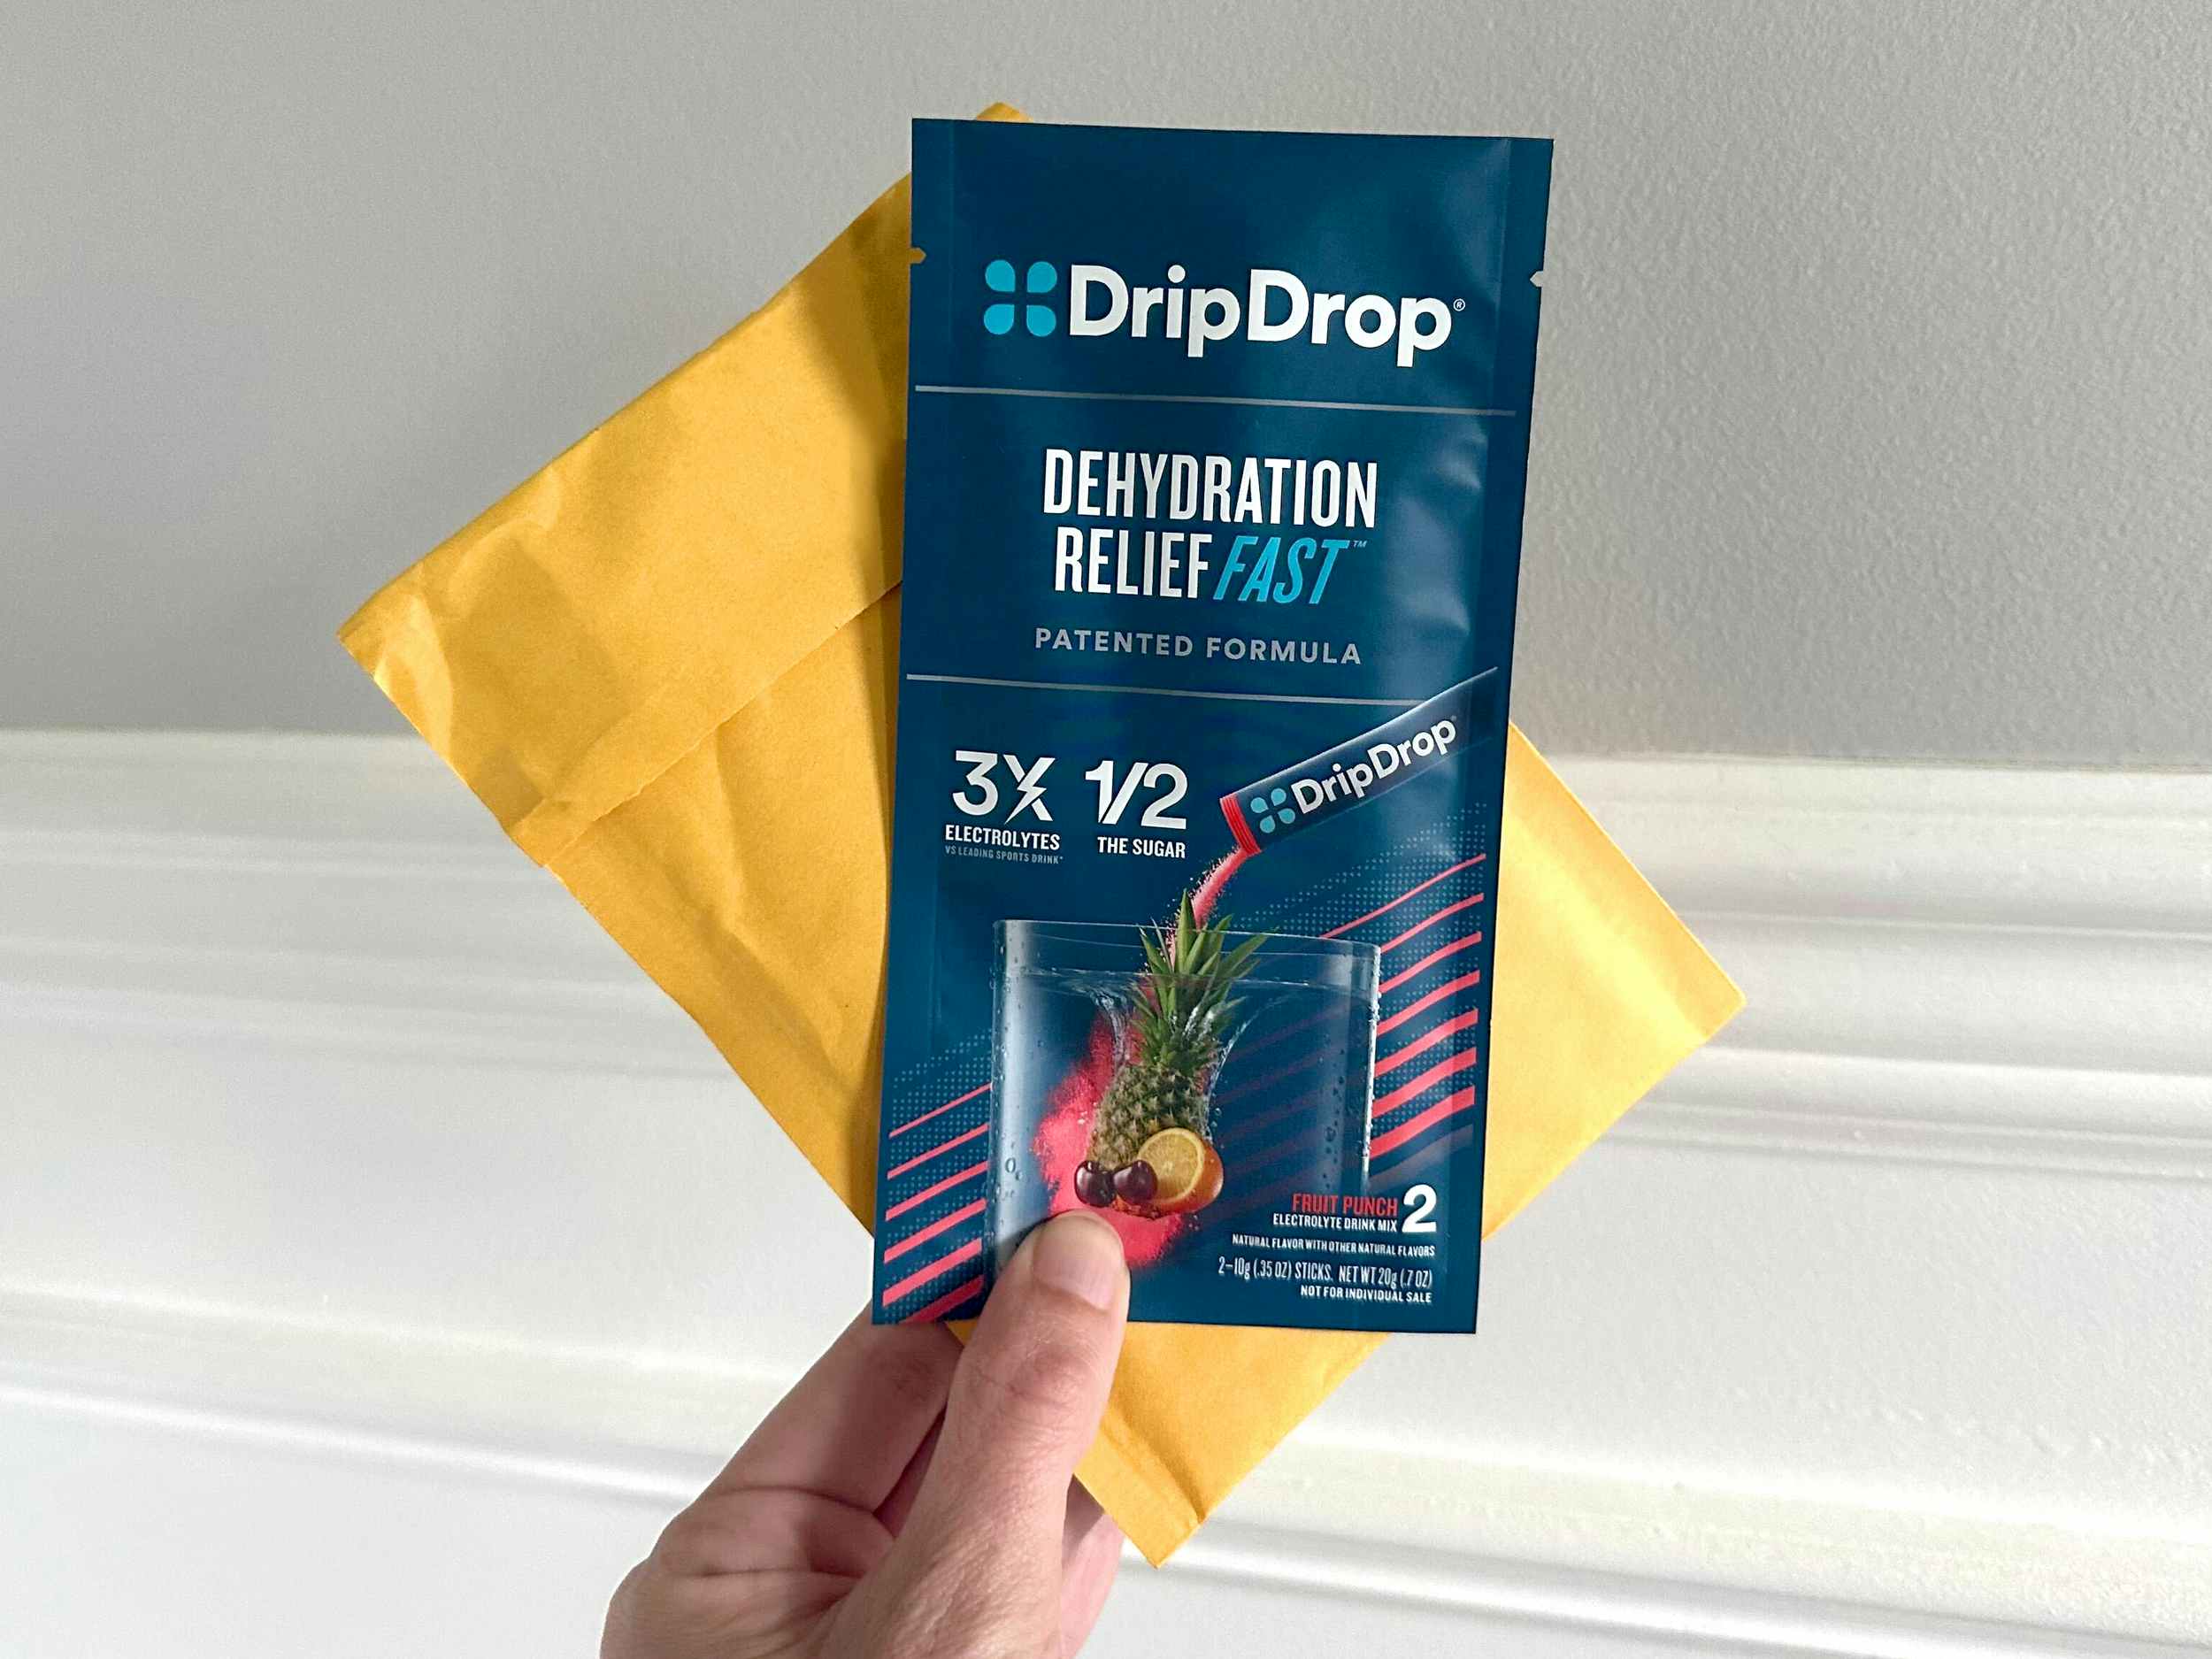 persons hand holding a dripdrop dehydration relief sample from amazon